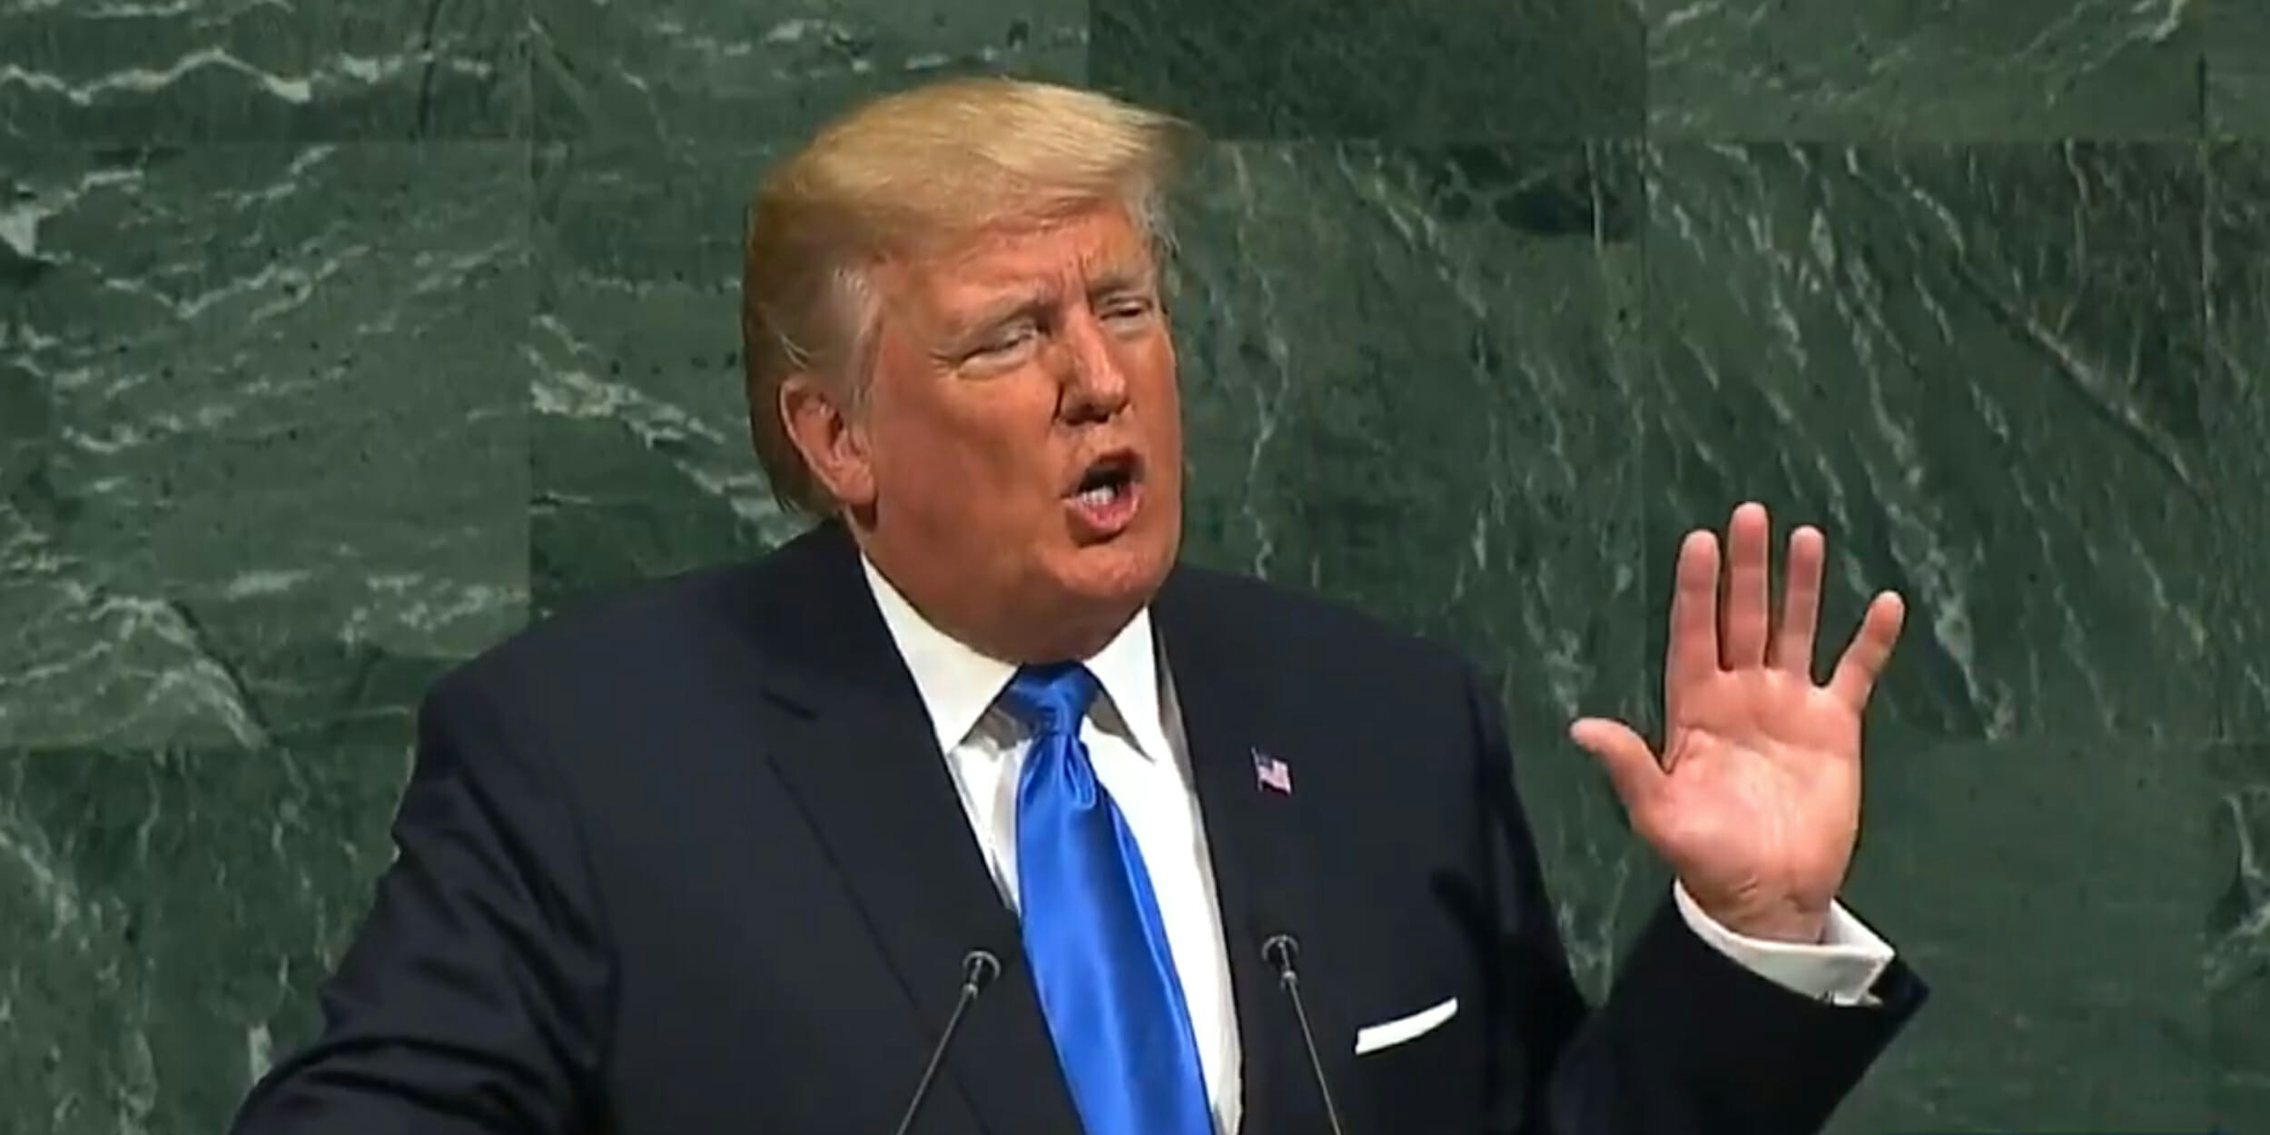 Trump speaks at the UN on Tuesday, Sept. 19, 2017.